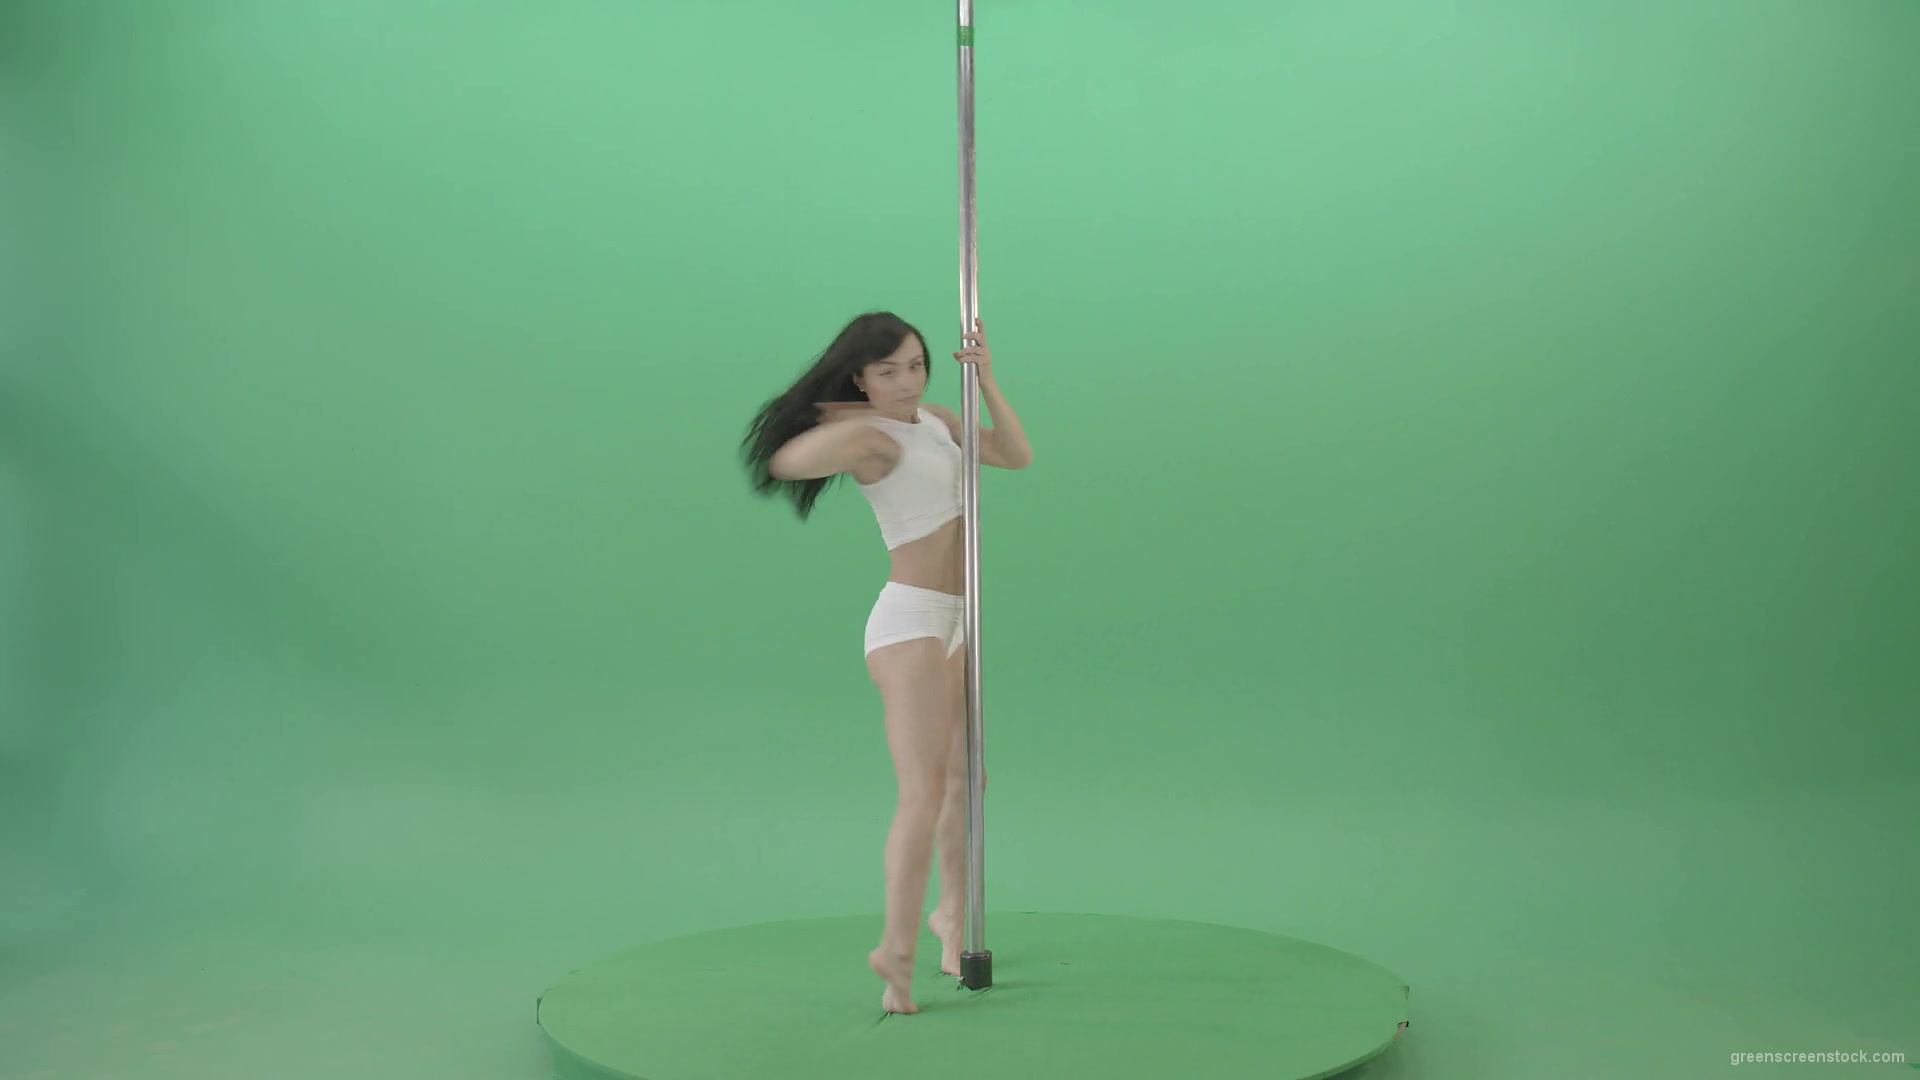 Sexy-moves-by-pole-dance-girl-dancing-on-green-screen-Video-Footage-1920_005 Green Screen Stock